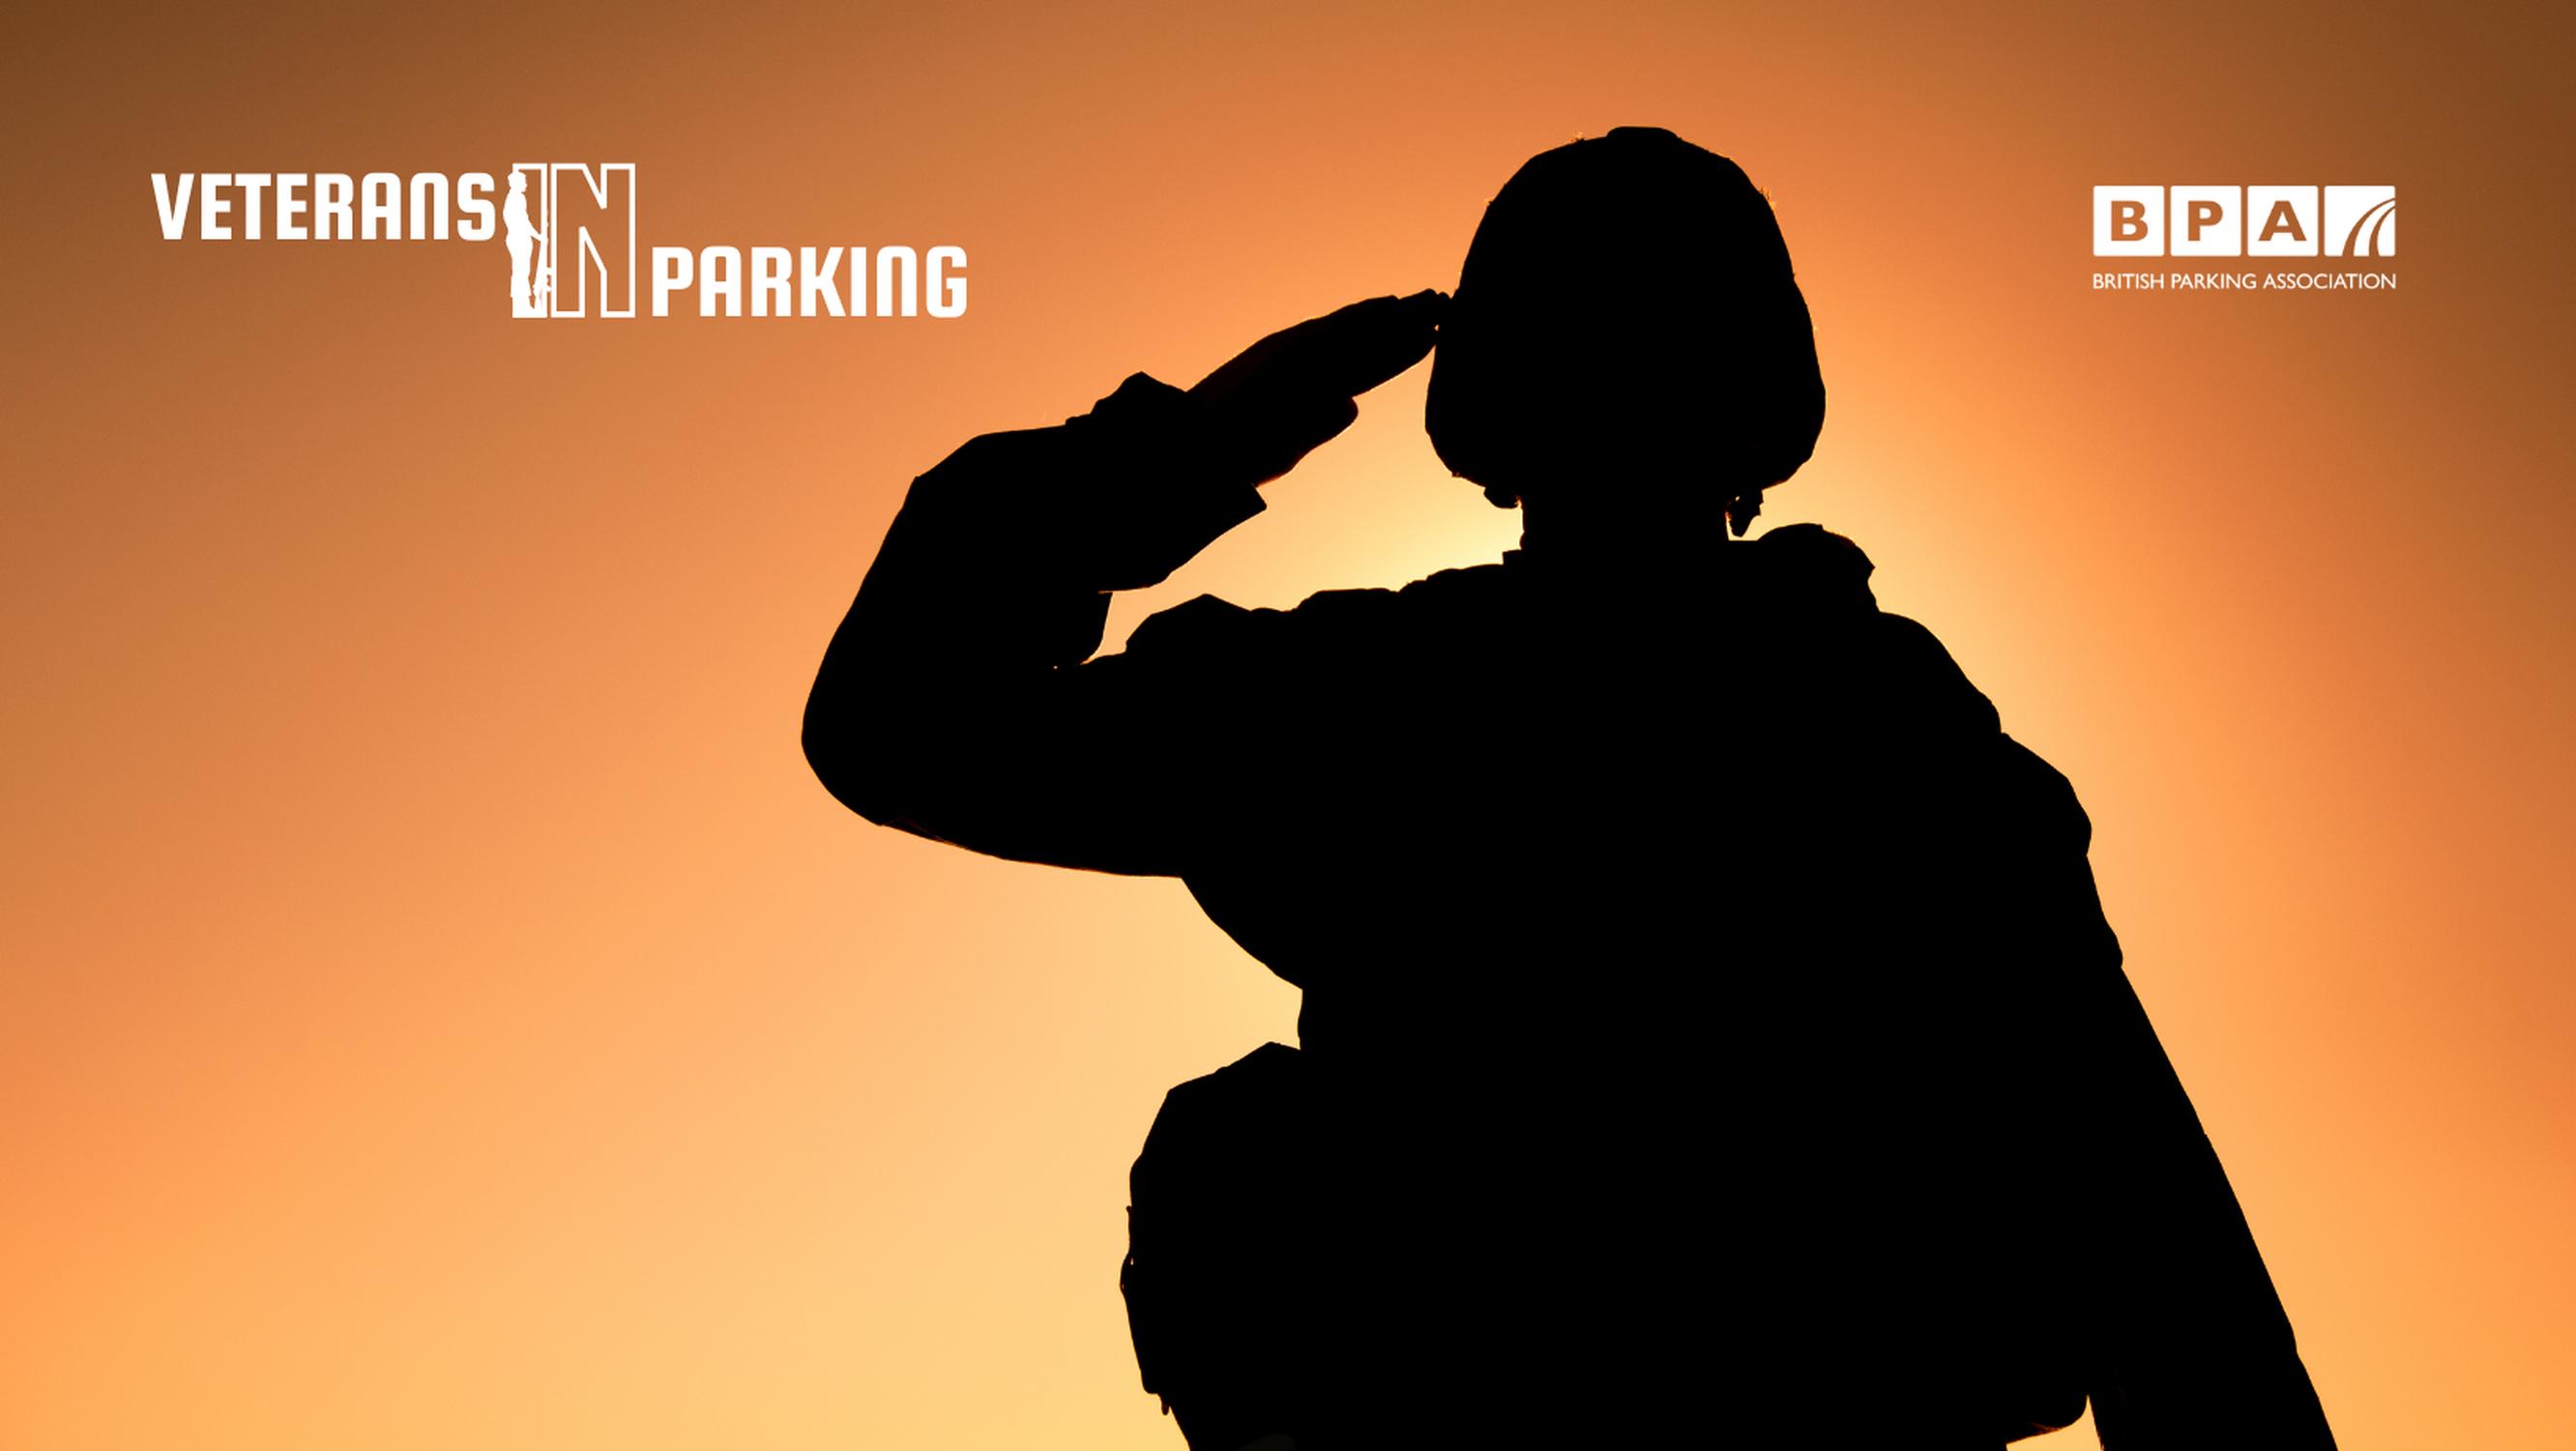 Veterans in Parking UK launched